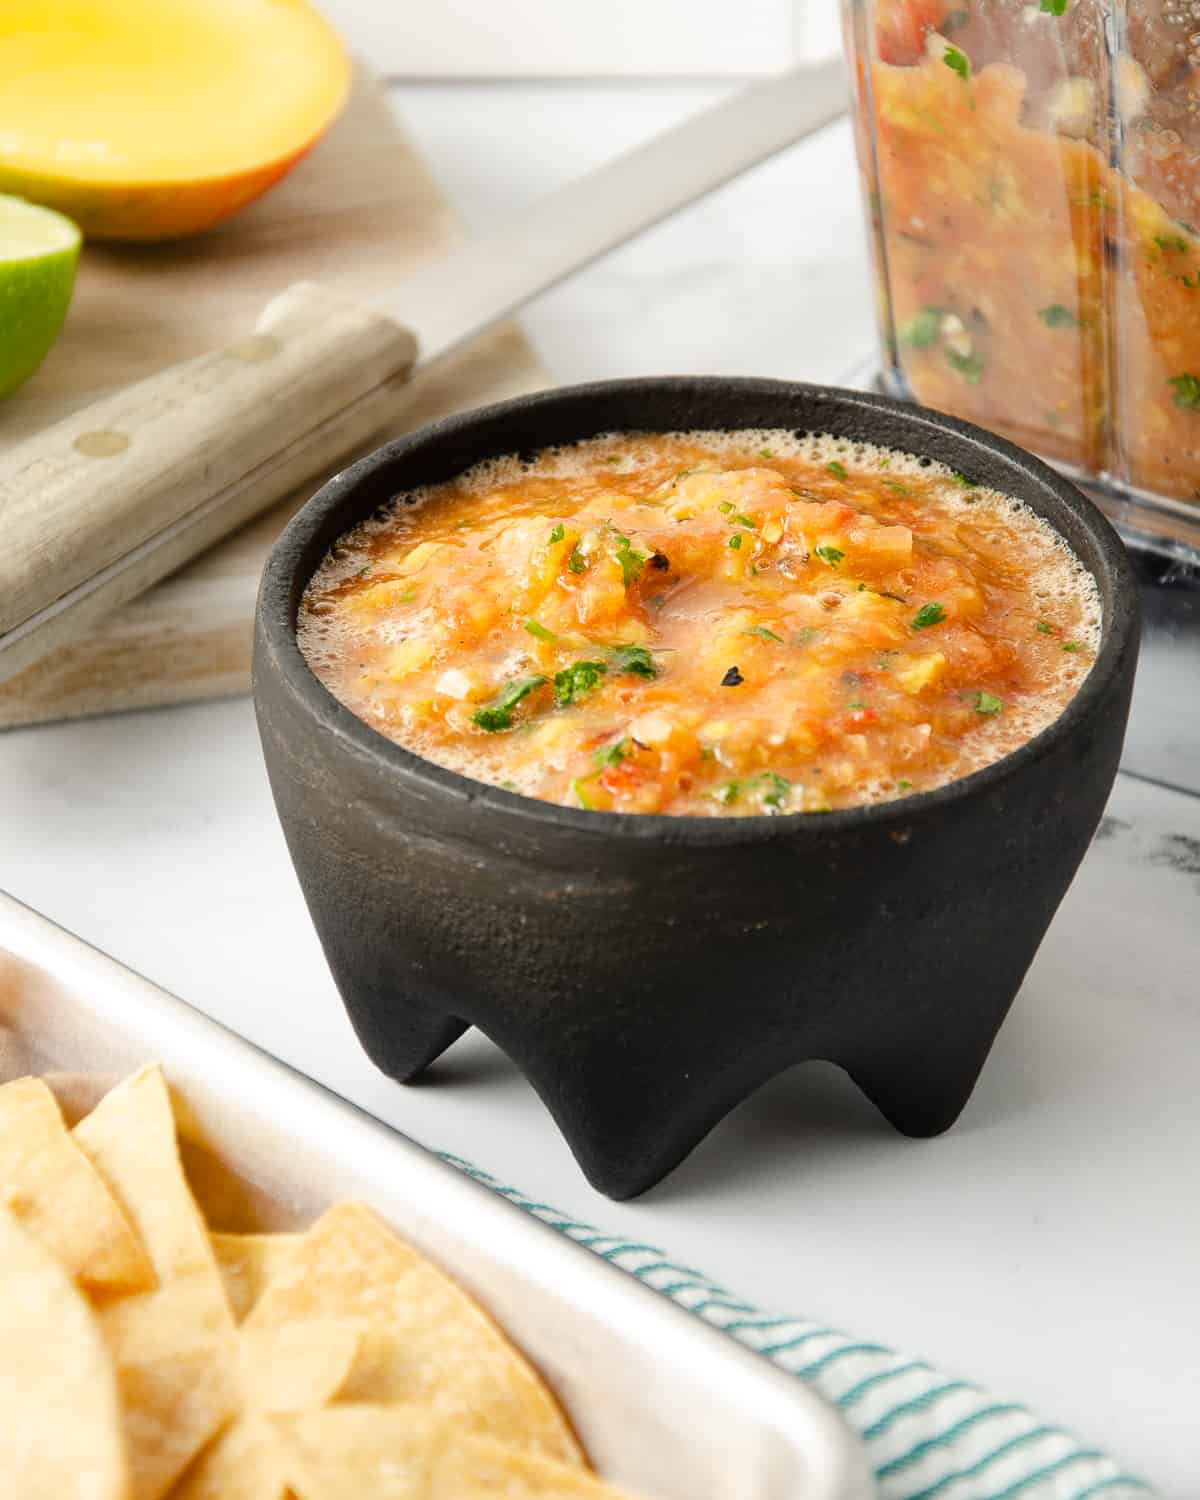 Salsa in a molcajete with the blender filled with more salsa to the right and homemade tortilla chips to the left.